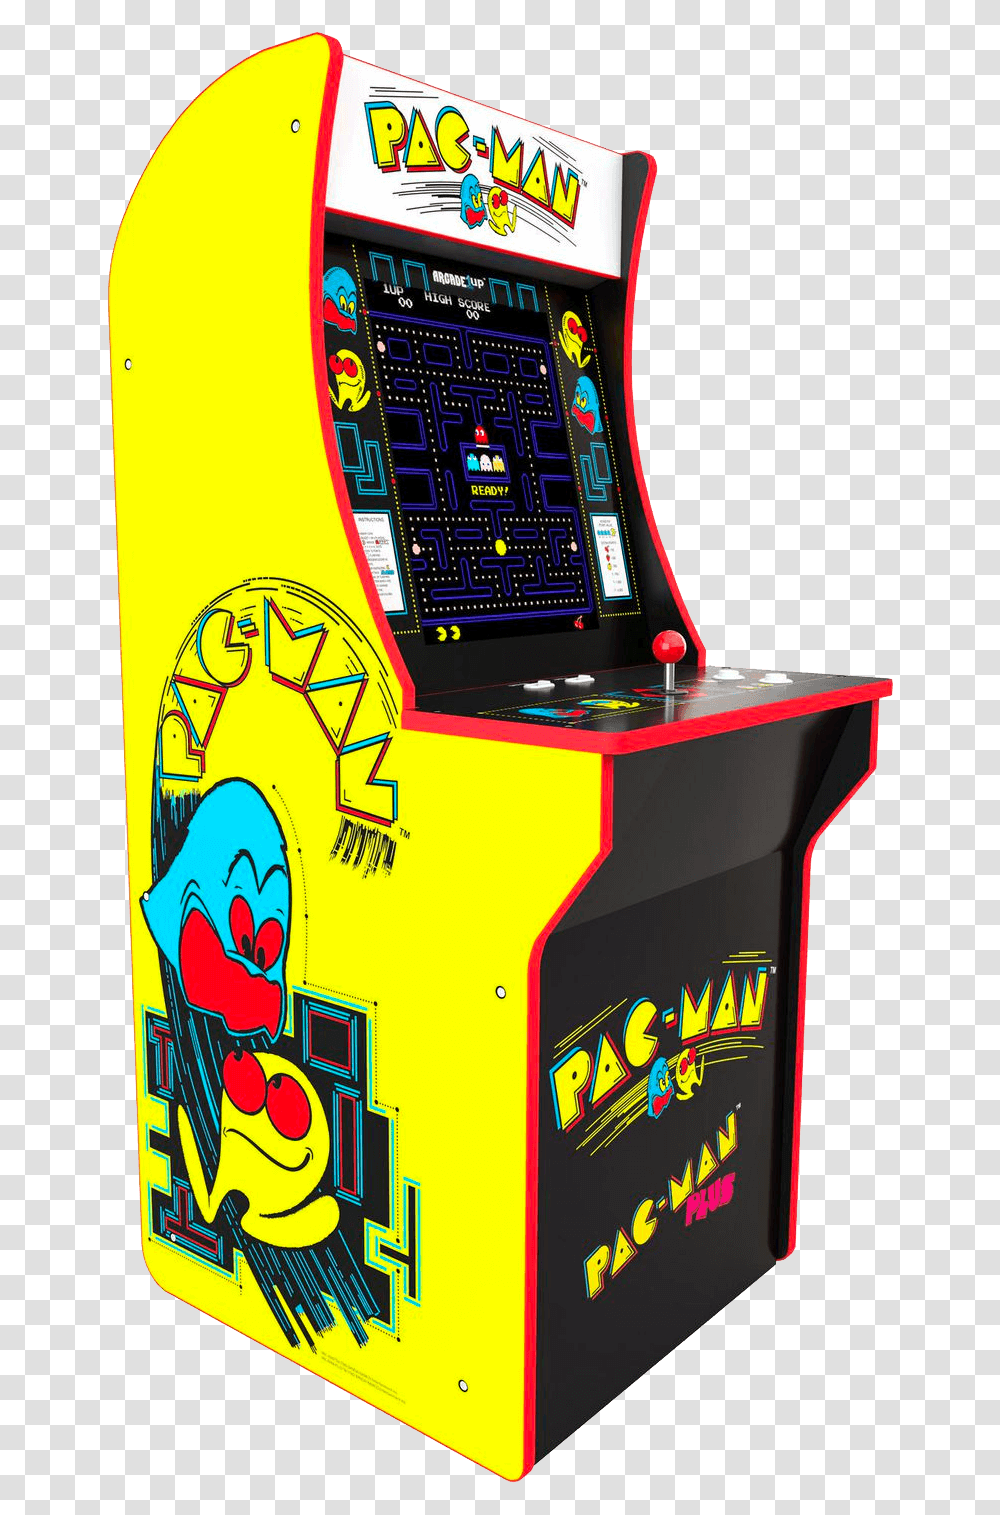 Pac Man Arcade CabinetClass Lazyload Lazyload Fade Arcade1up Pacman, Arcade Game Machine Transparent Png